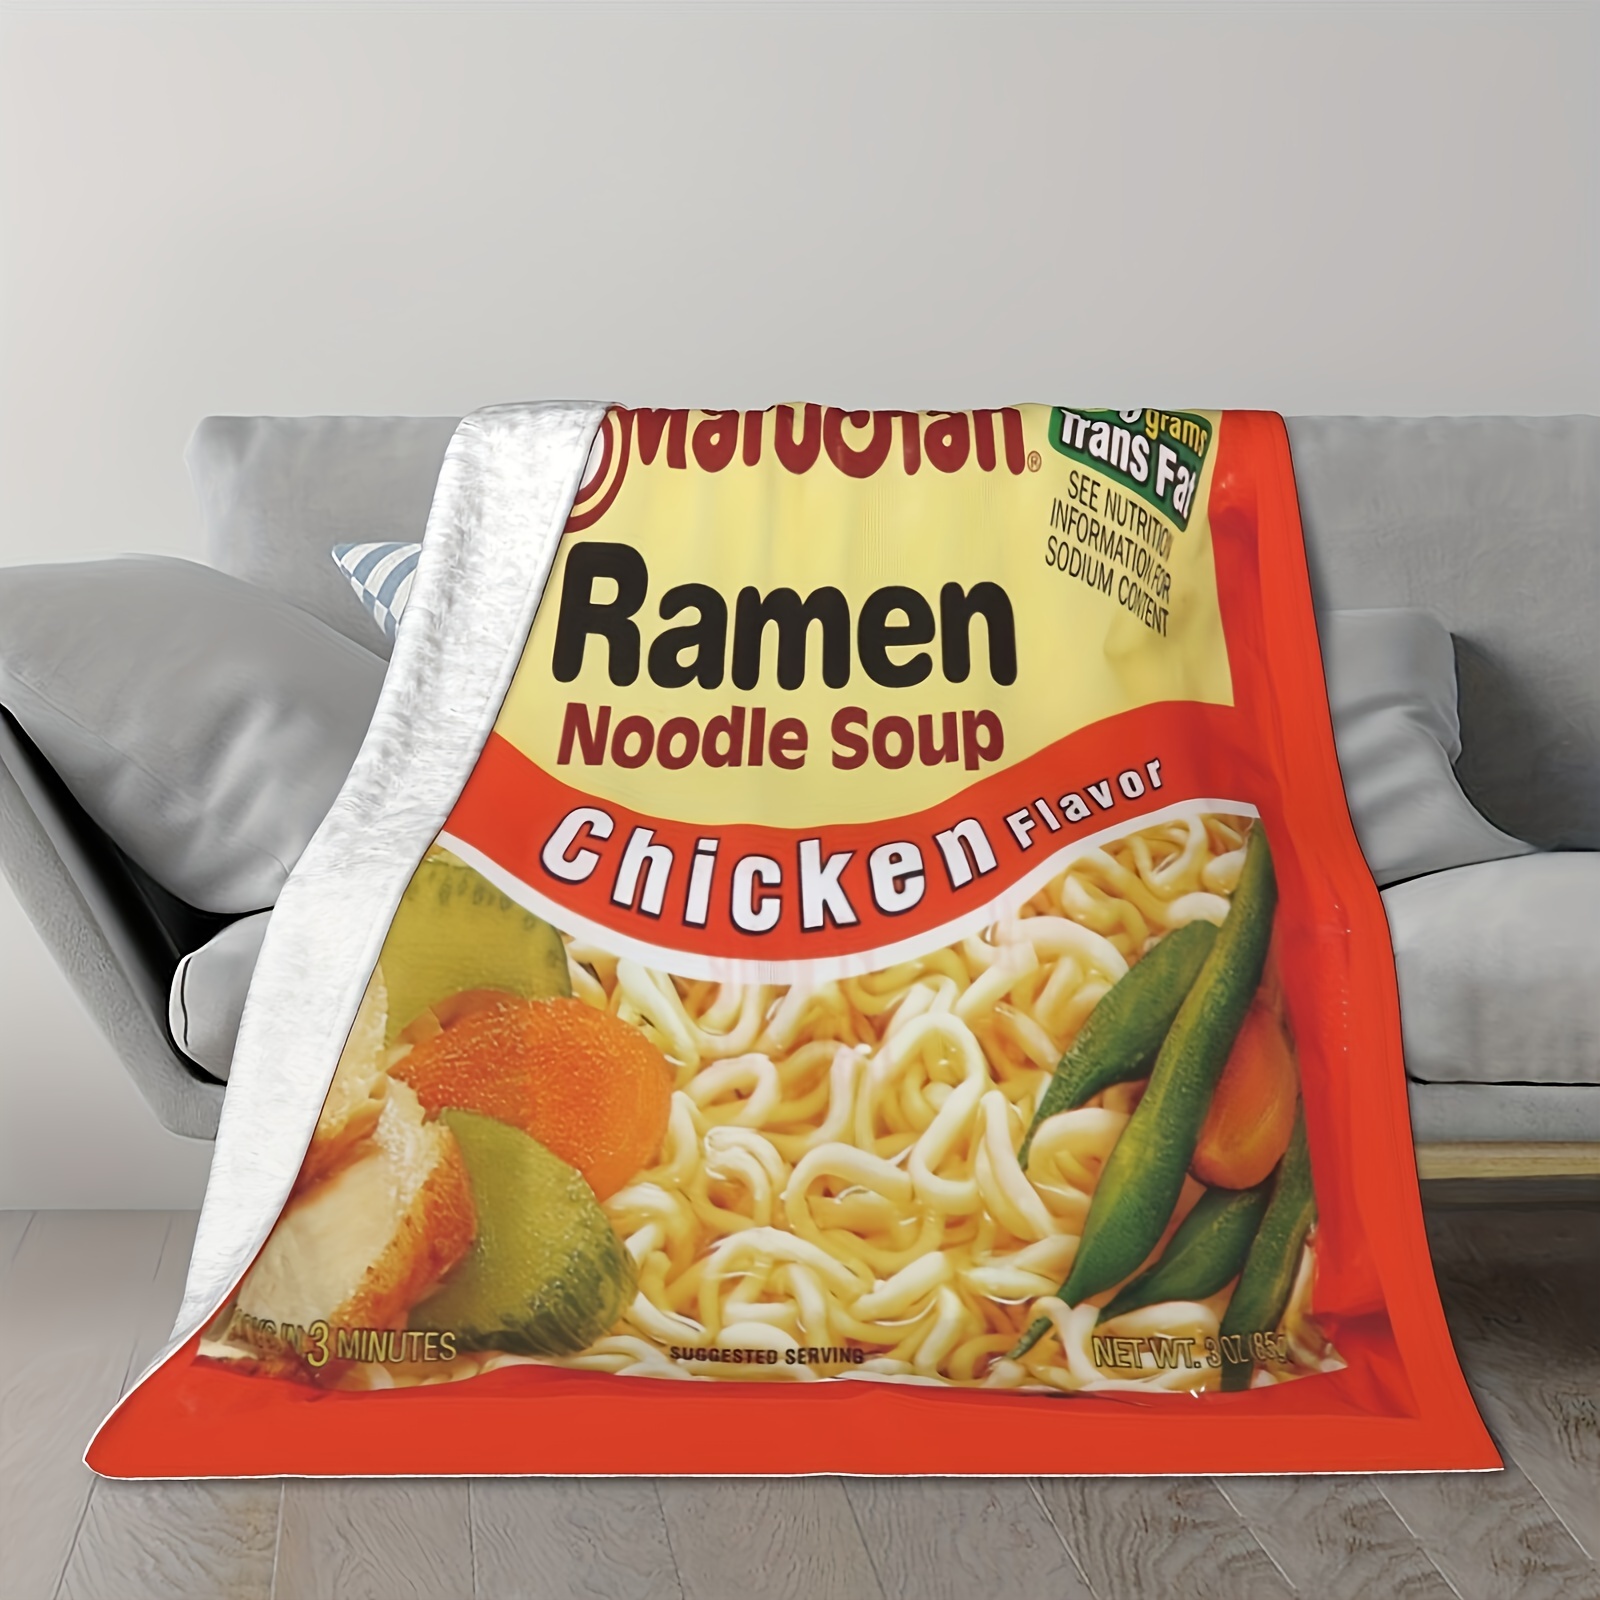 

1pc Lightweight Chicken Flavored Noodle Soup Flannel Blanket - Soft And Cozy Microfiber Blanket For All Seasons - Perfect For Sofa, Couch, Office, Camping, And More